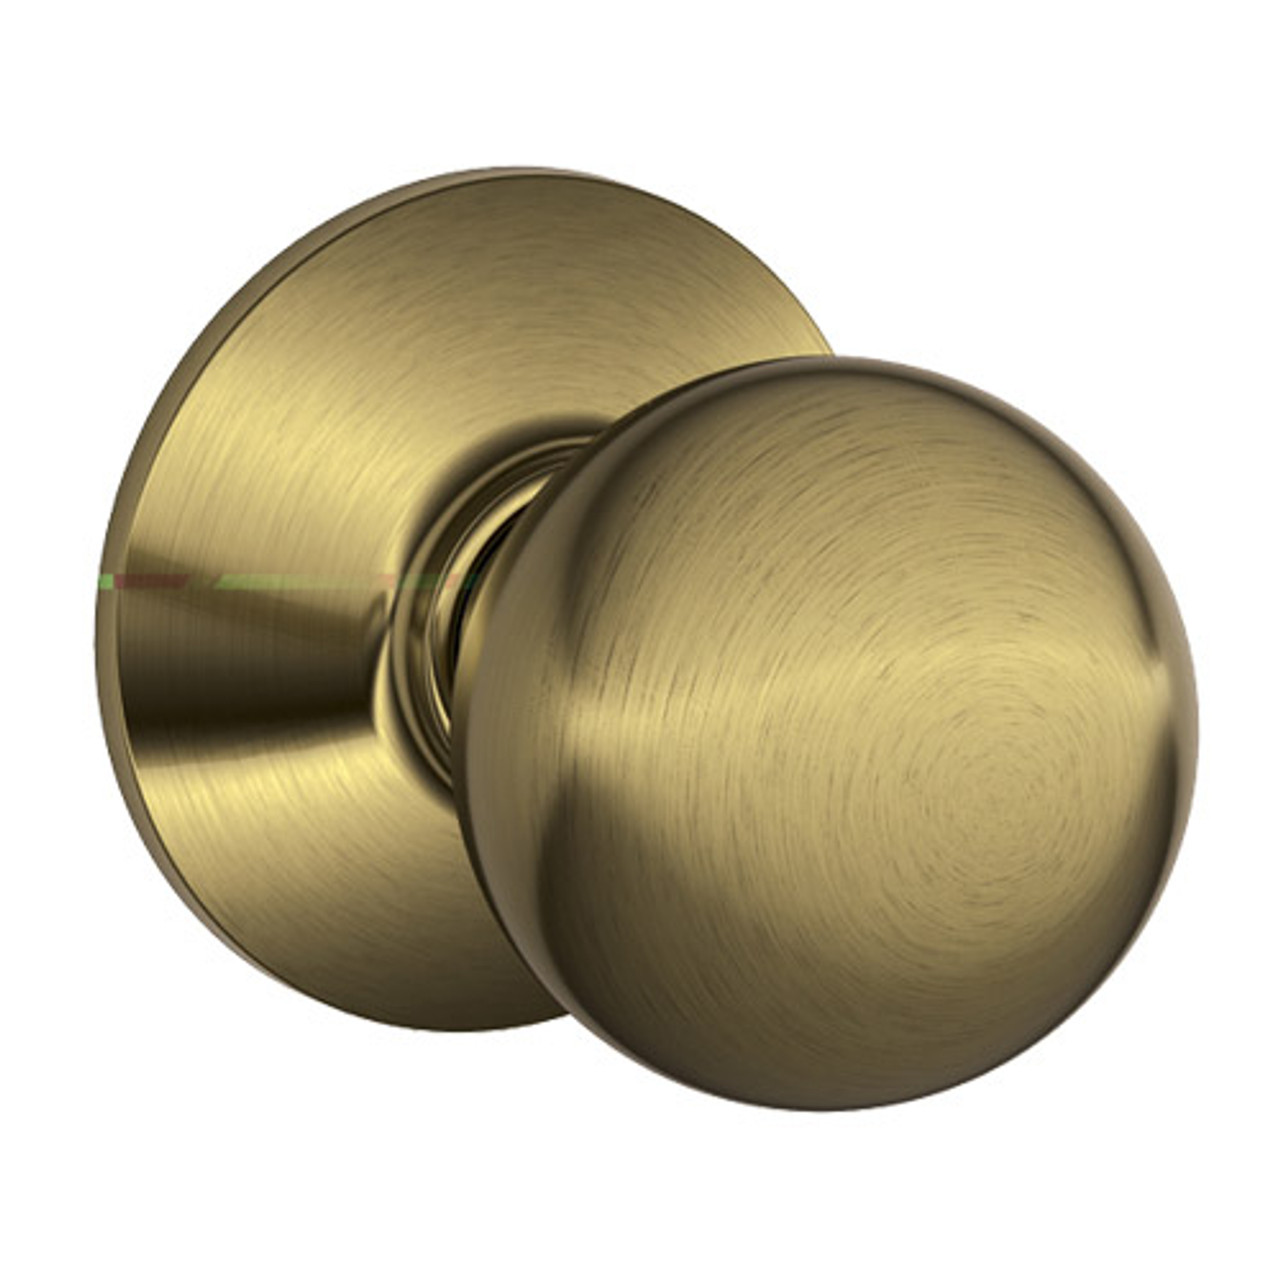 A10S-ORB-609 Schlage Orbit Commercial Cylindrical Lock in Antique Brass